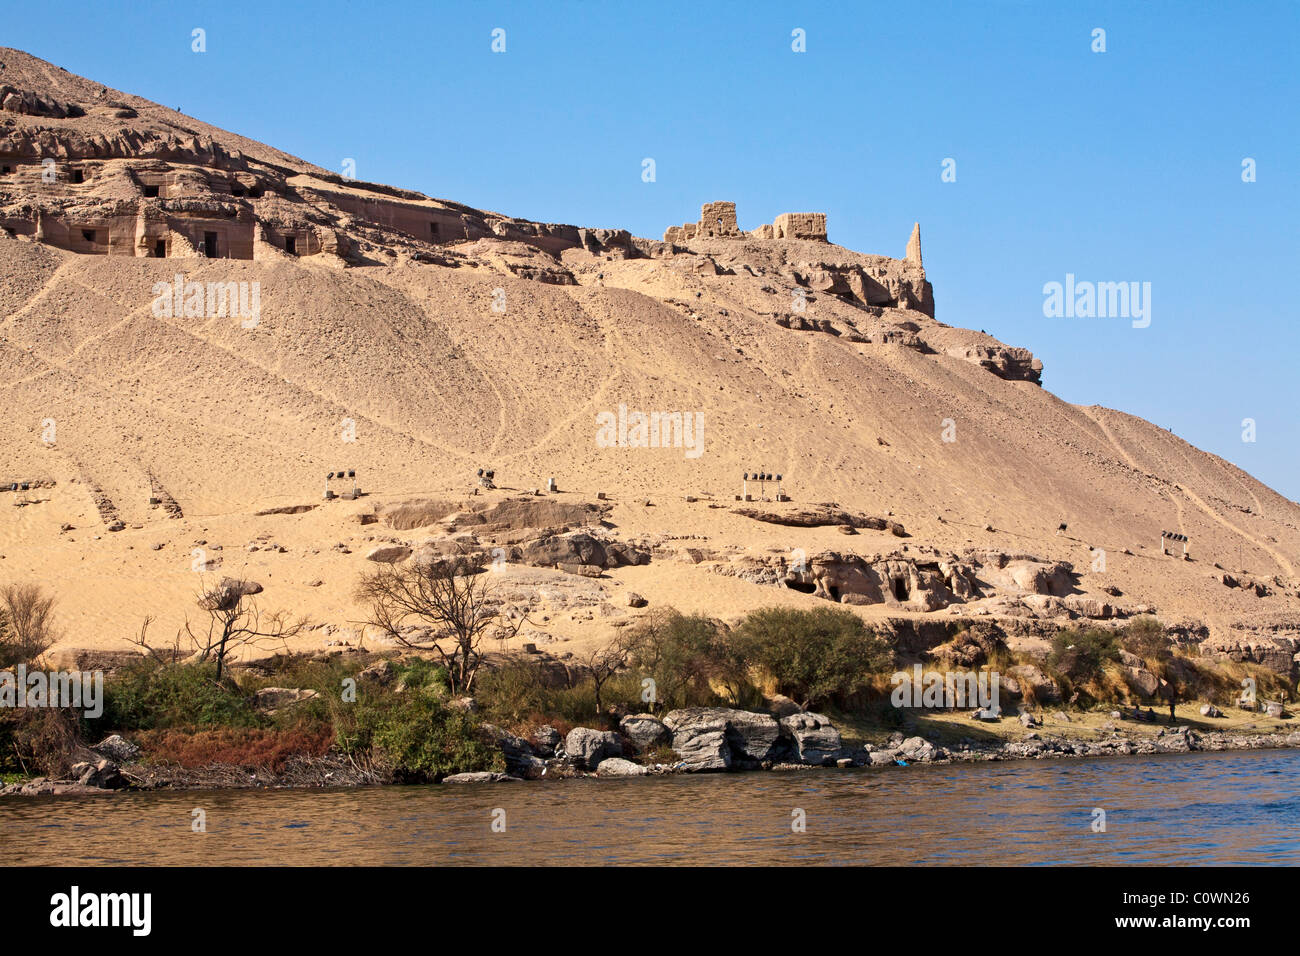 Egypt's Nobles Tombs are built into the sandstone cliffs on the Nile River near the city of Aswan Stock Photo